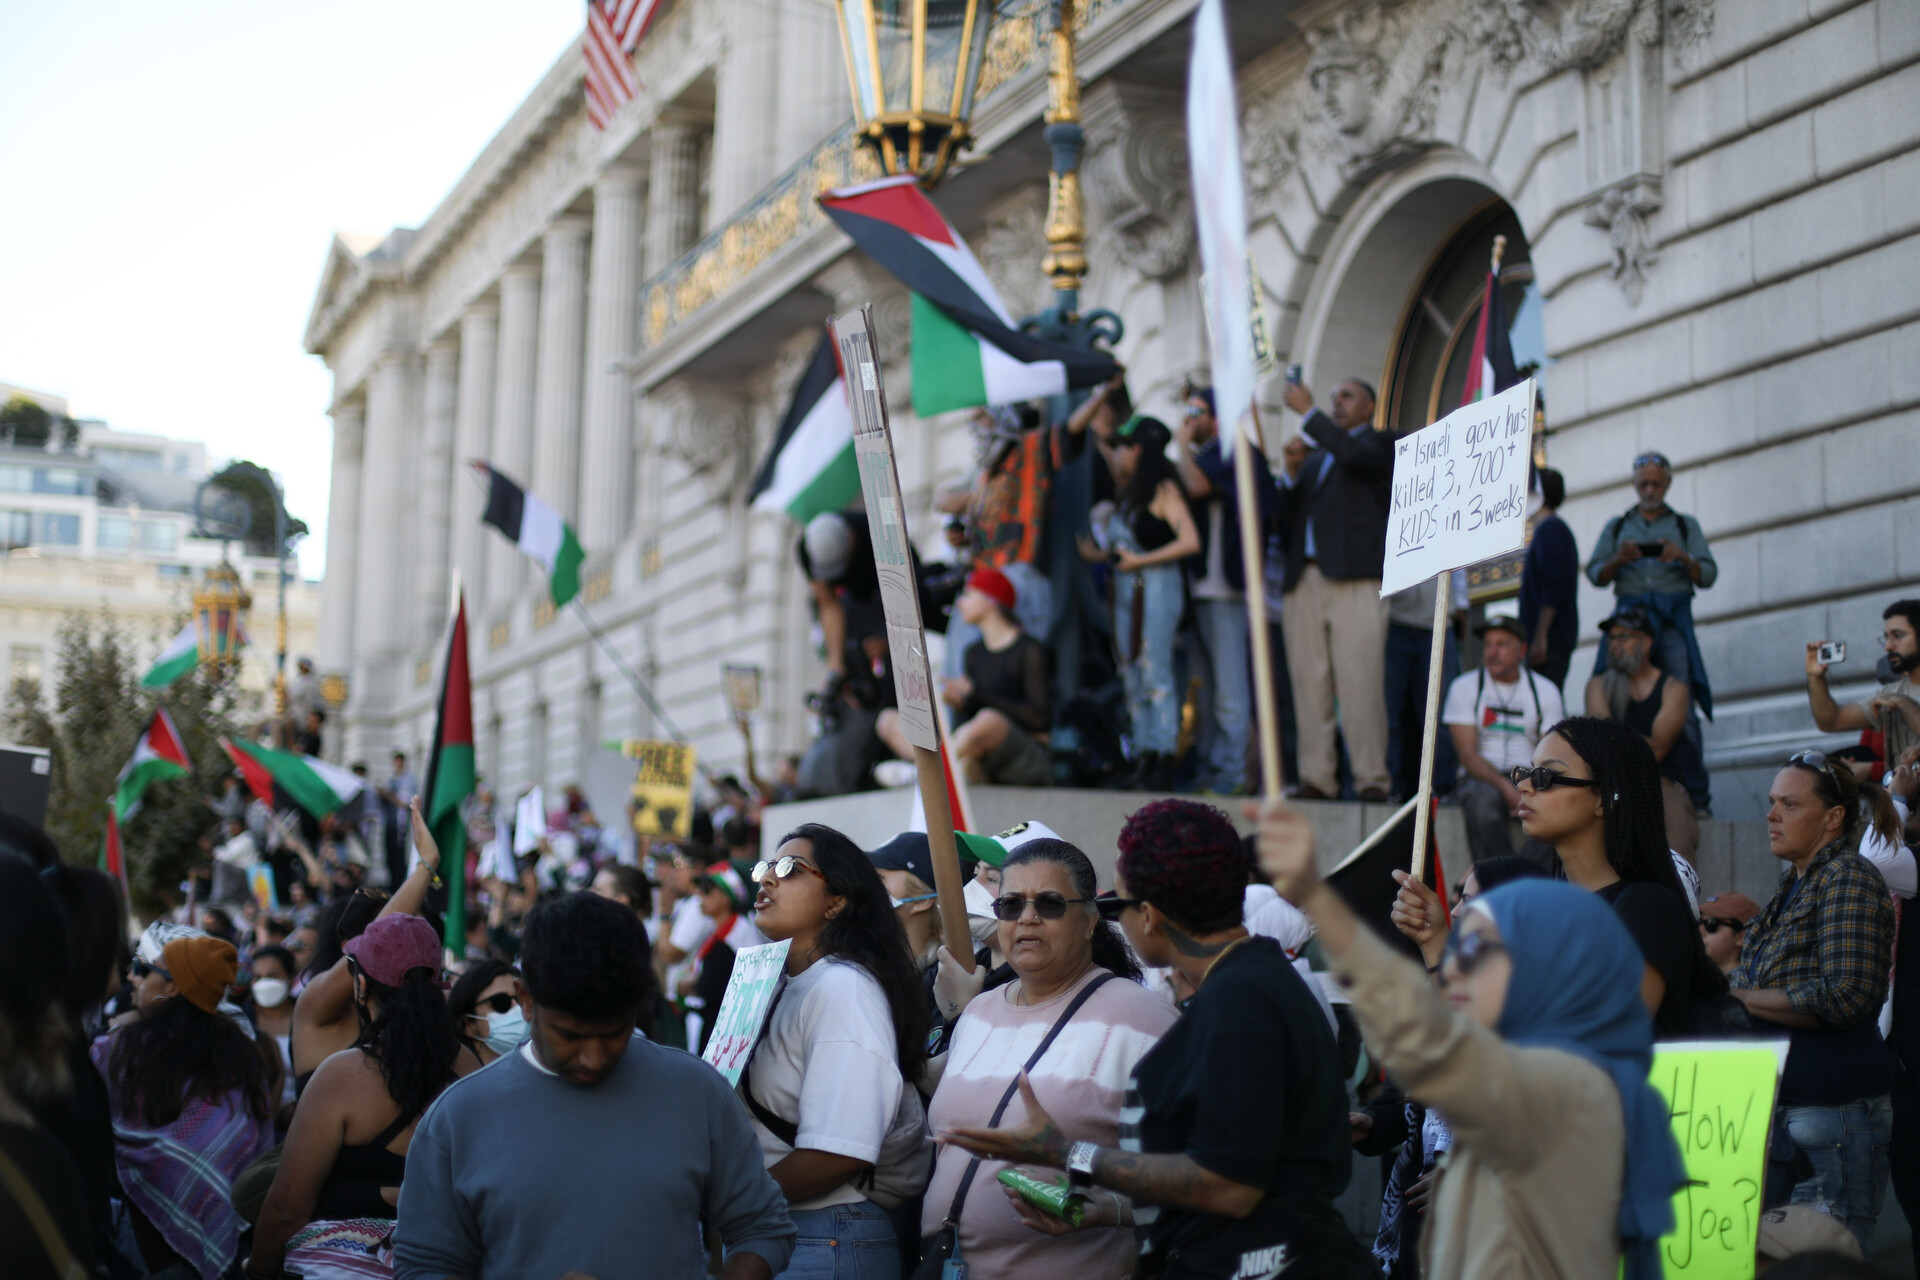 A crowd of protesters with signs and Palestinian flags gathered on the steps of San Francisco City Hall.